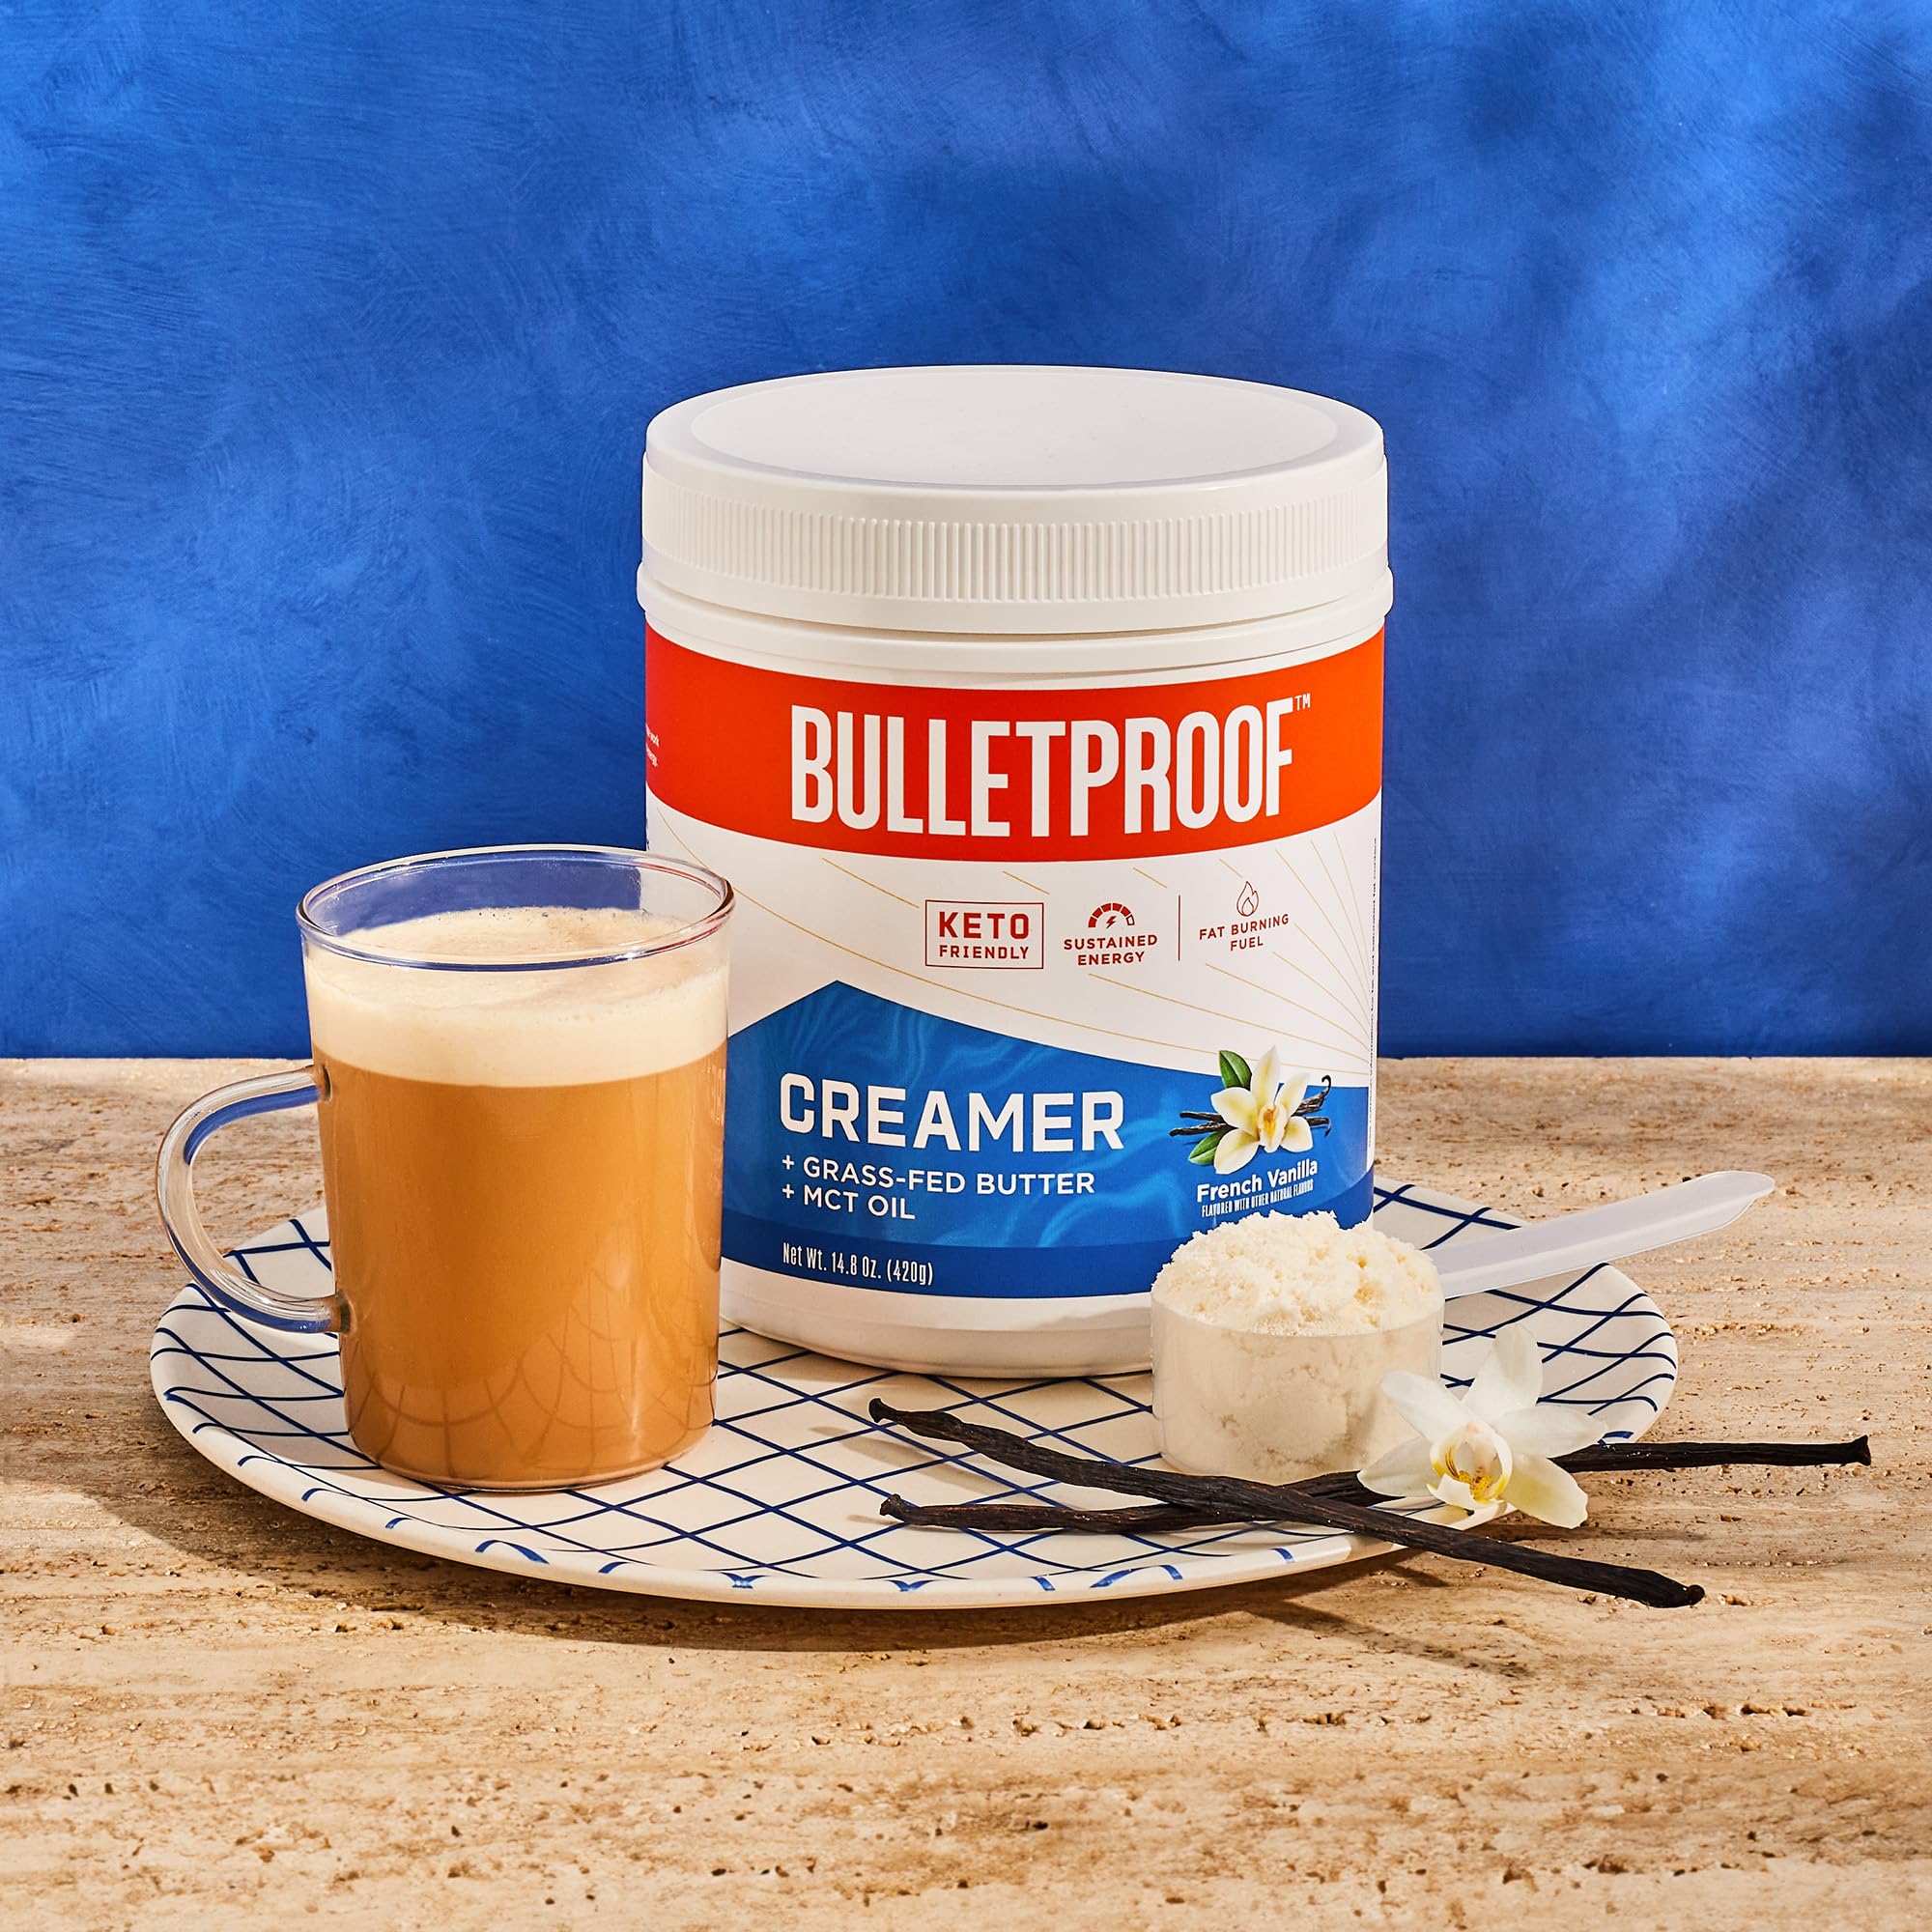 Bulletproof French Vanilla Creamer, 14.8 Ounces, Keto Coffee Creamer with MCT Oil and Grass-Fed Butter